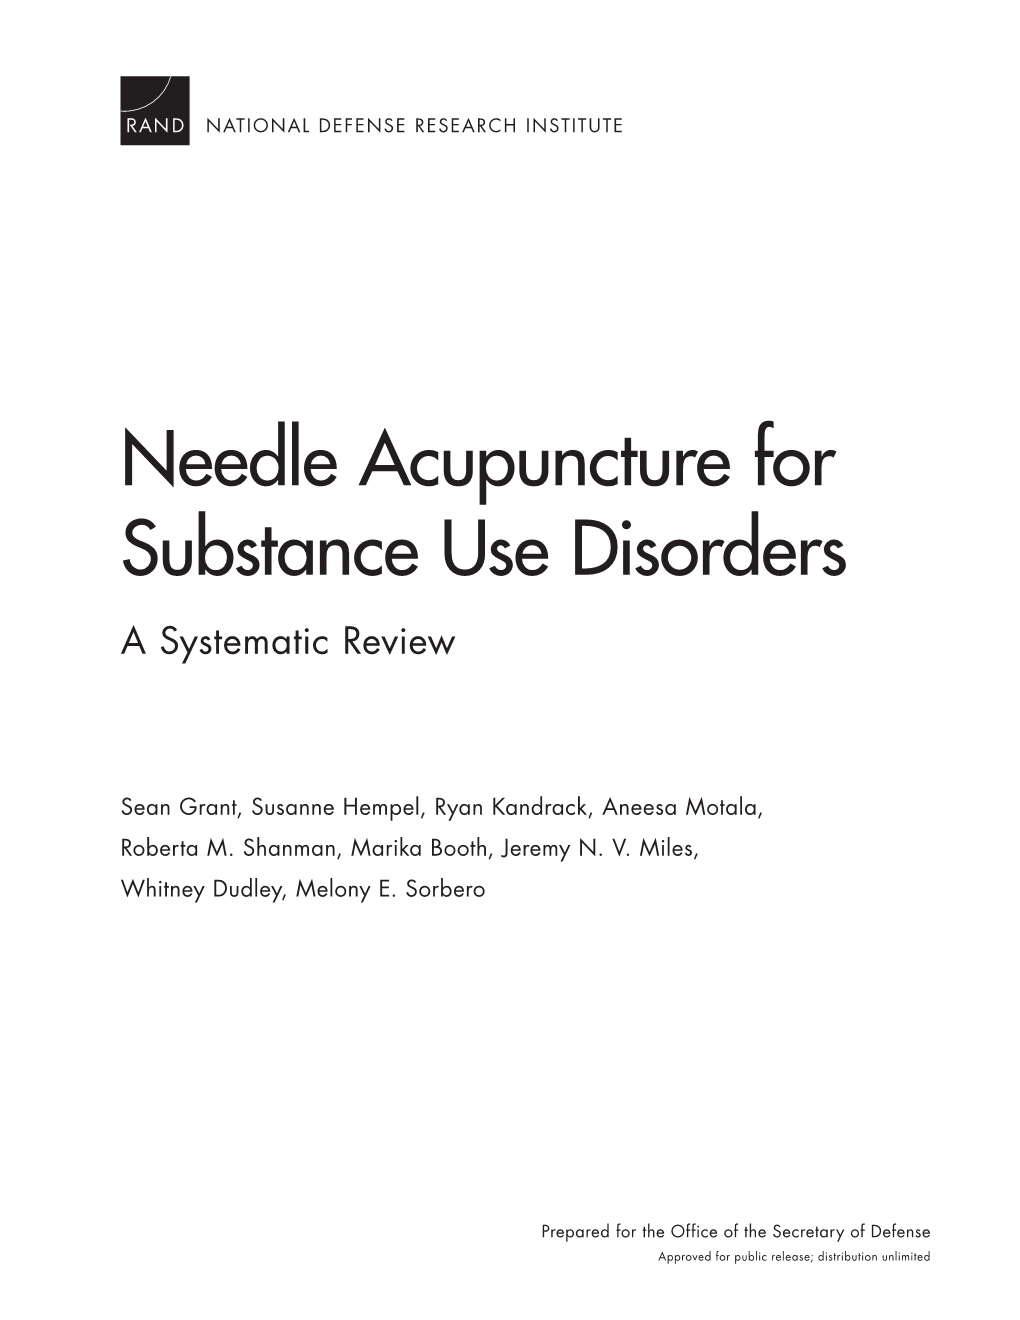 Needle Acupuncture for Substance Use Disorders a Systematic Review